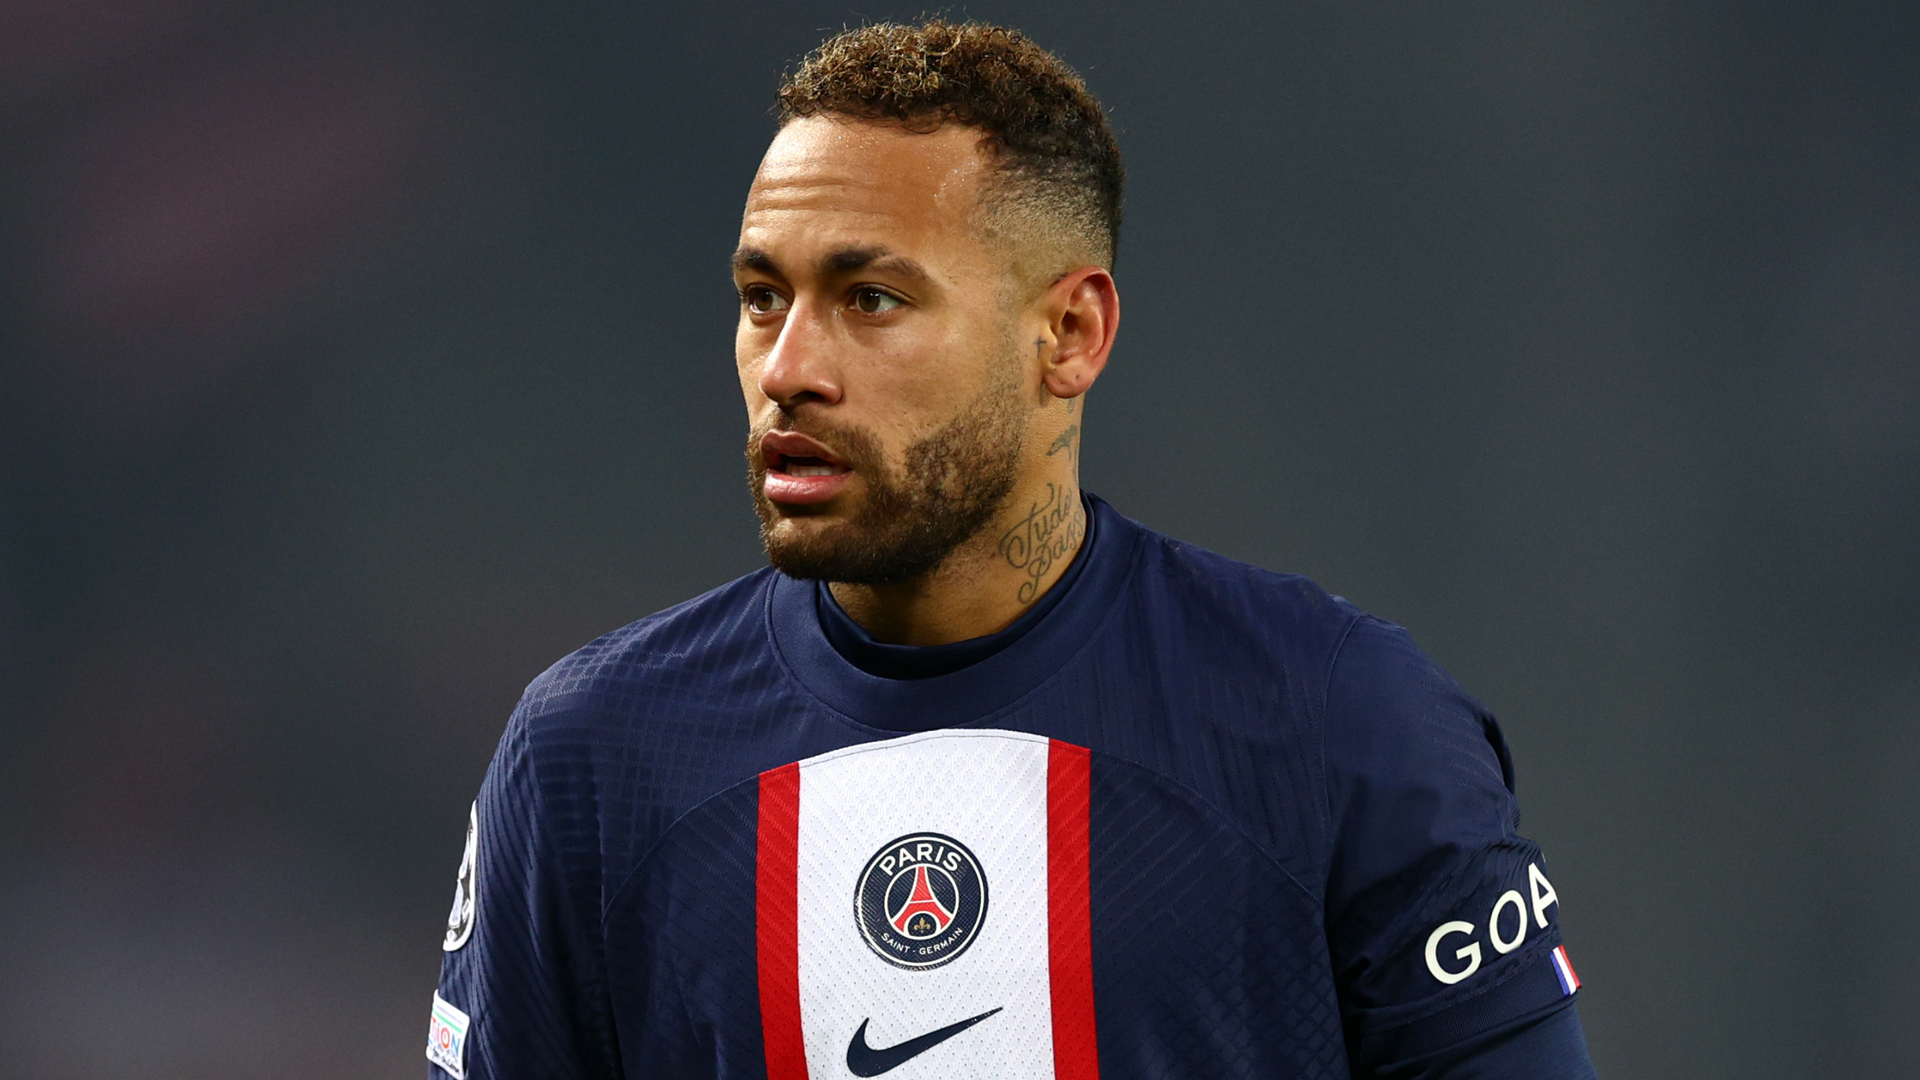 Neymar determined to STAY at PSG despite club putting him on transfer list  - even if Lionel Messi leaves this summer | Goal.com